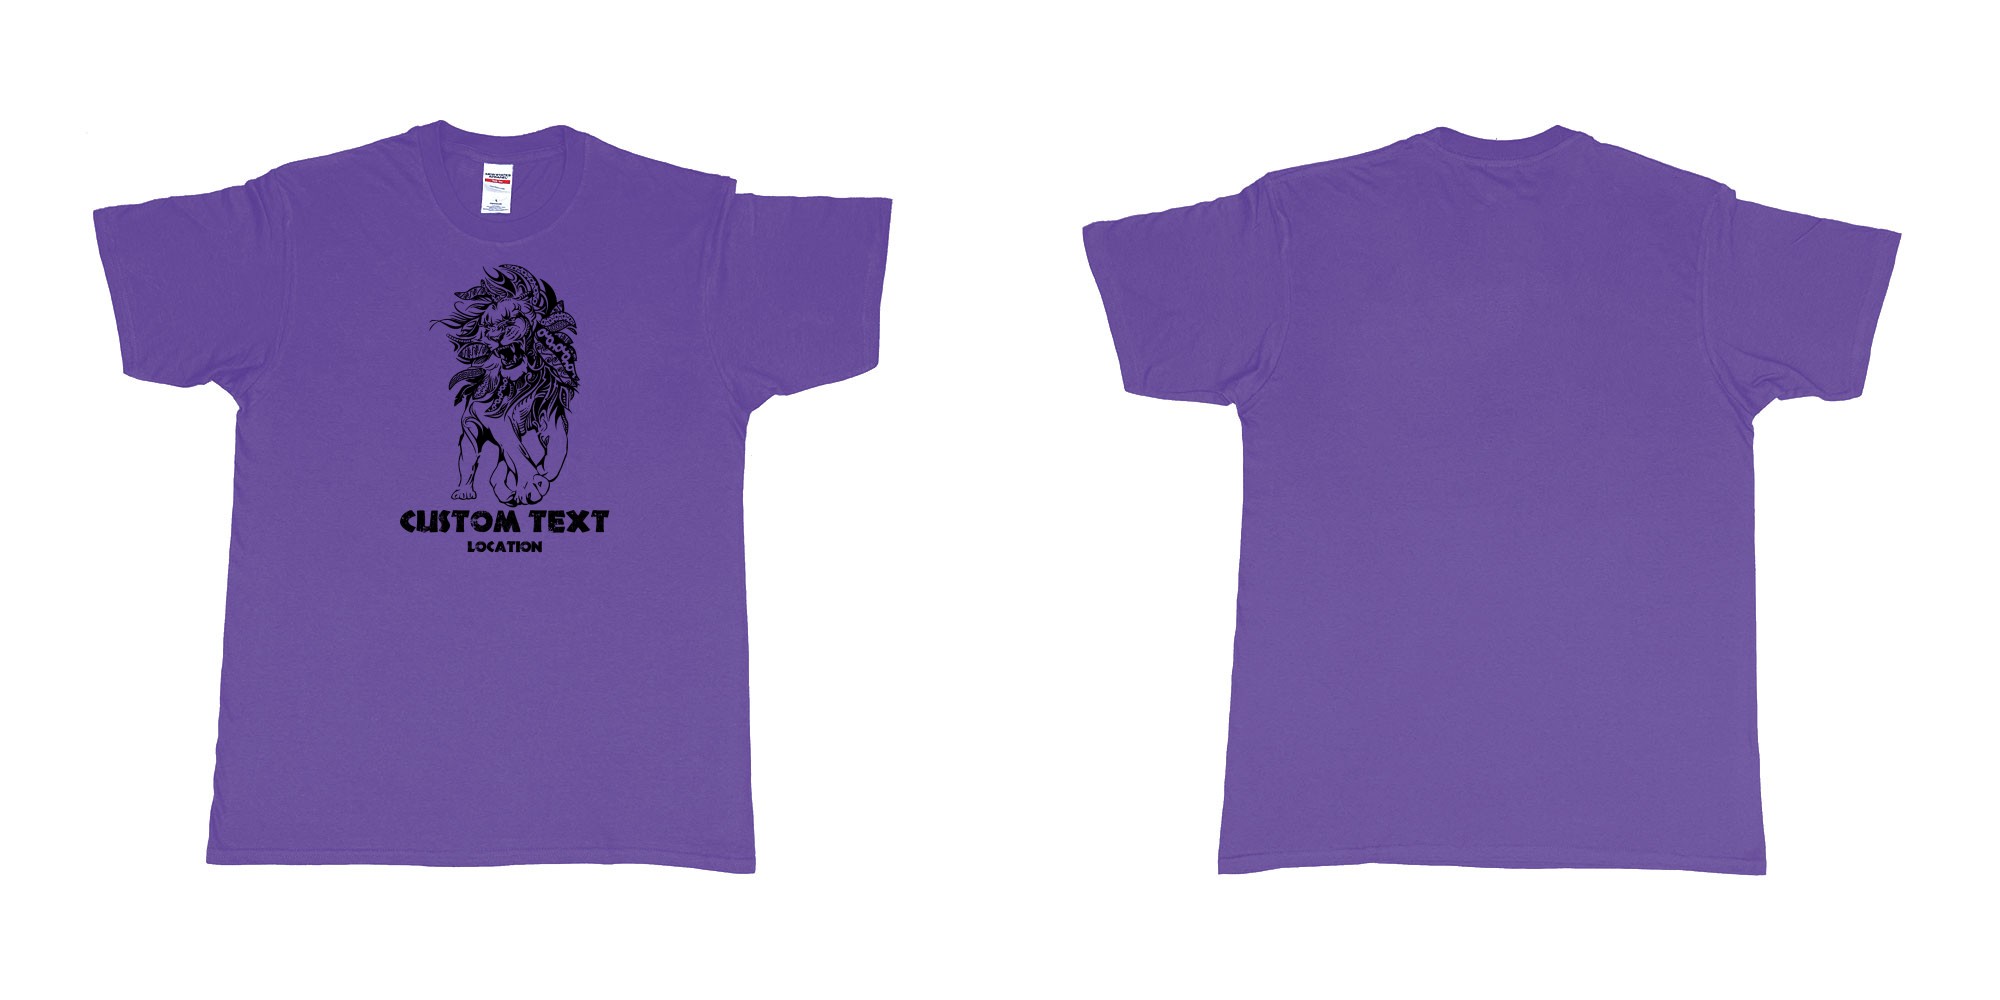 Custom tshirt design lion august tribal in fabric color purple choice your own text made in Bali by The Pirate Way